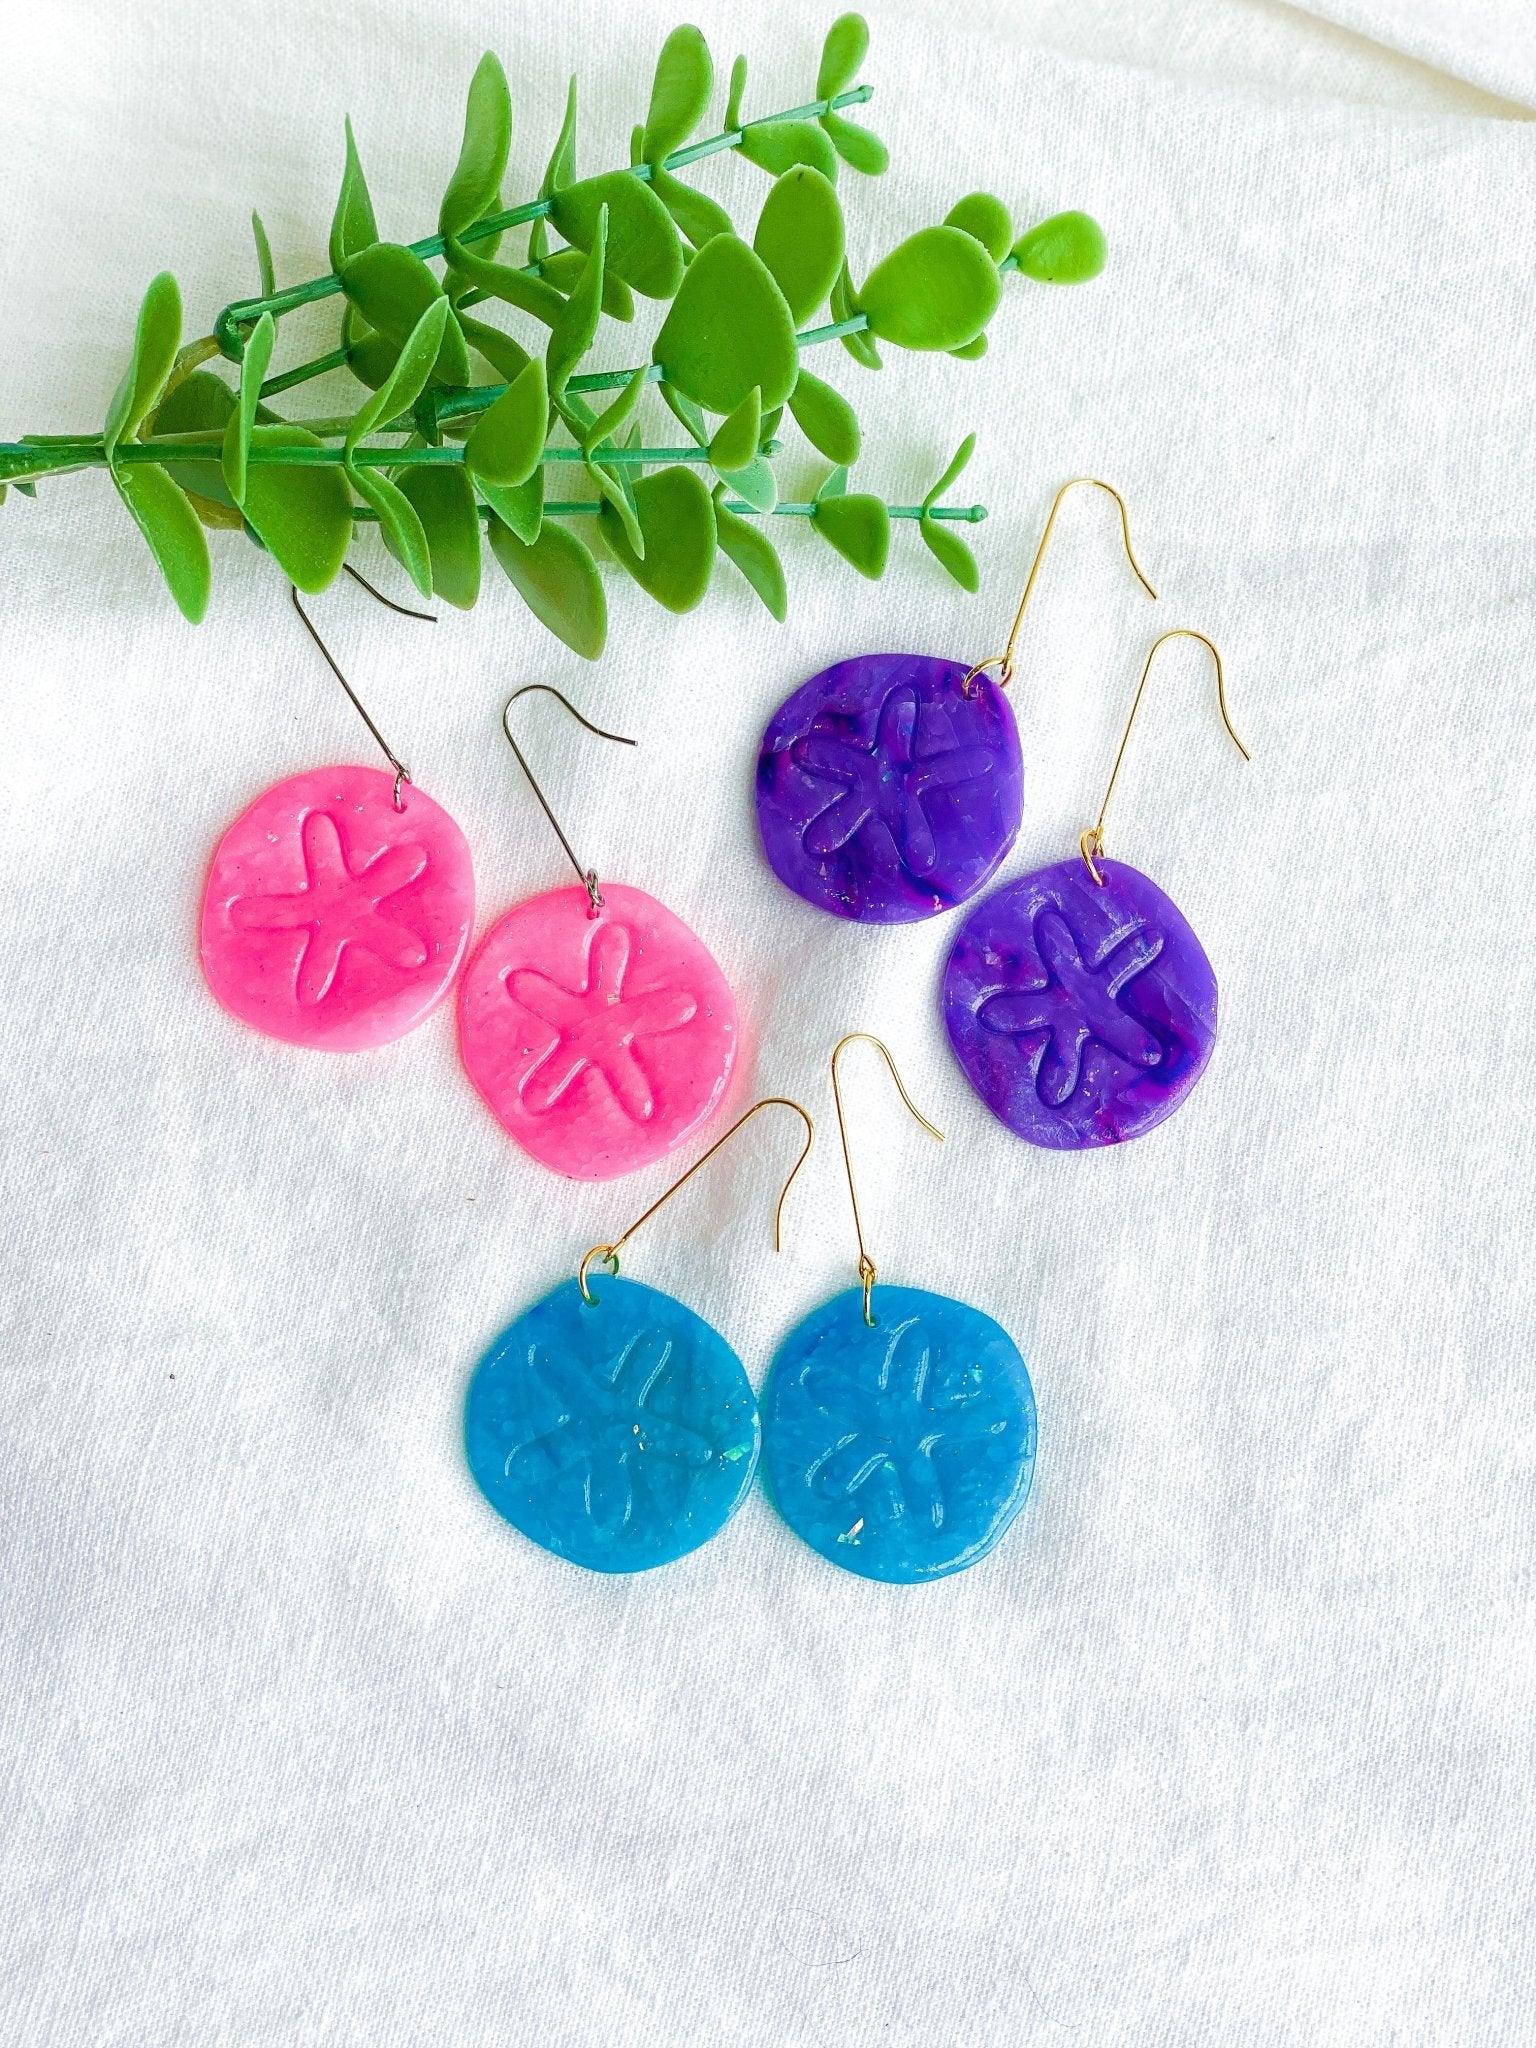 Three Pairs of Handmade Bright Colored Sand Dollar Earrings on Long Surgical Steel Ear Wires laying flat on white linen cloth